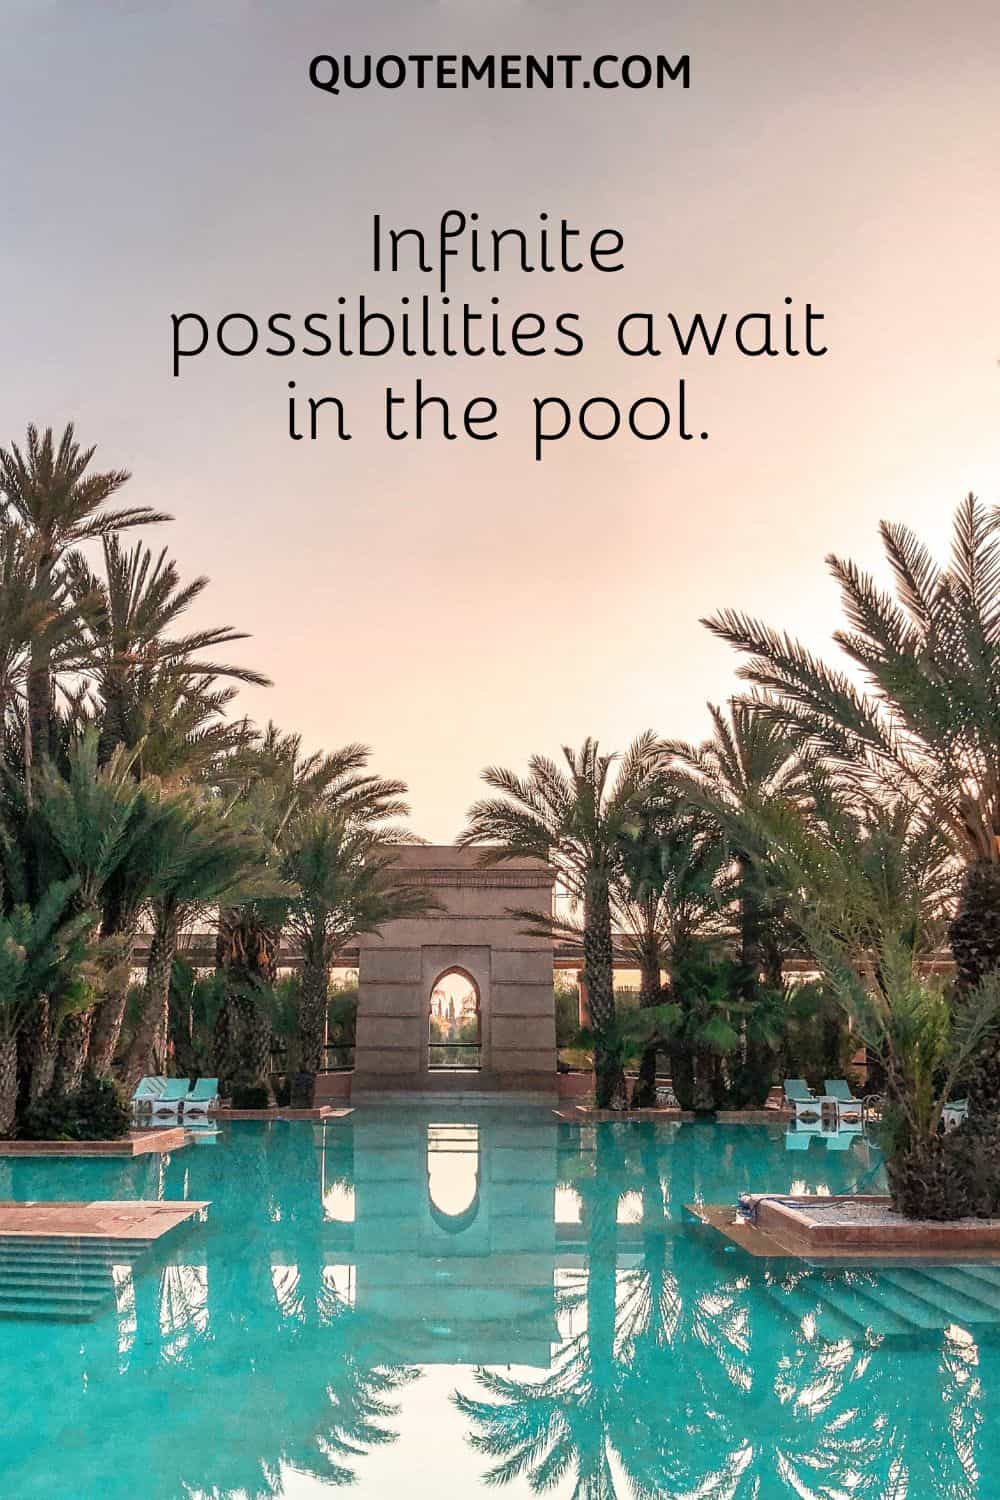 Infinite possibilities await in the pool.